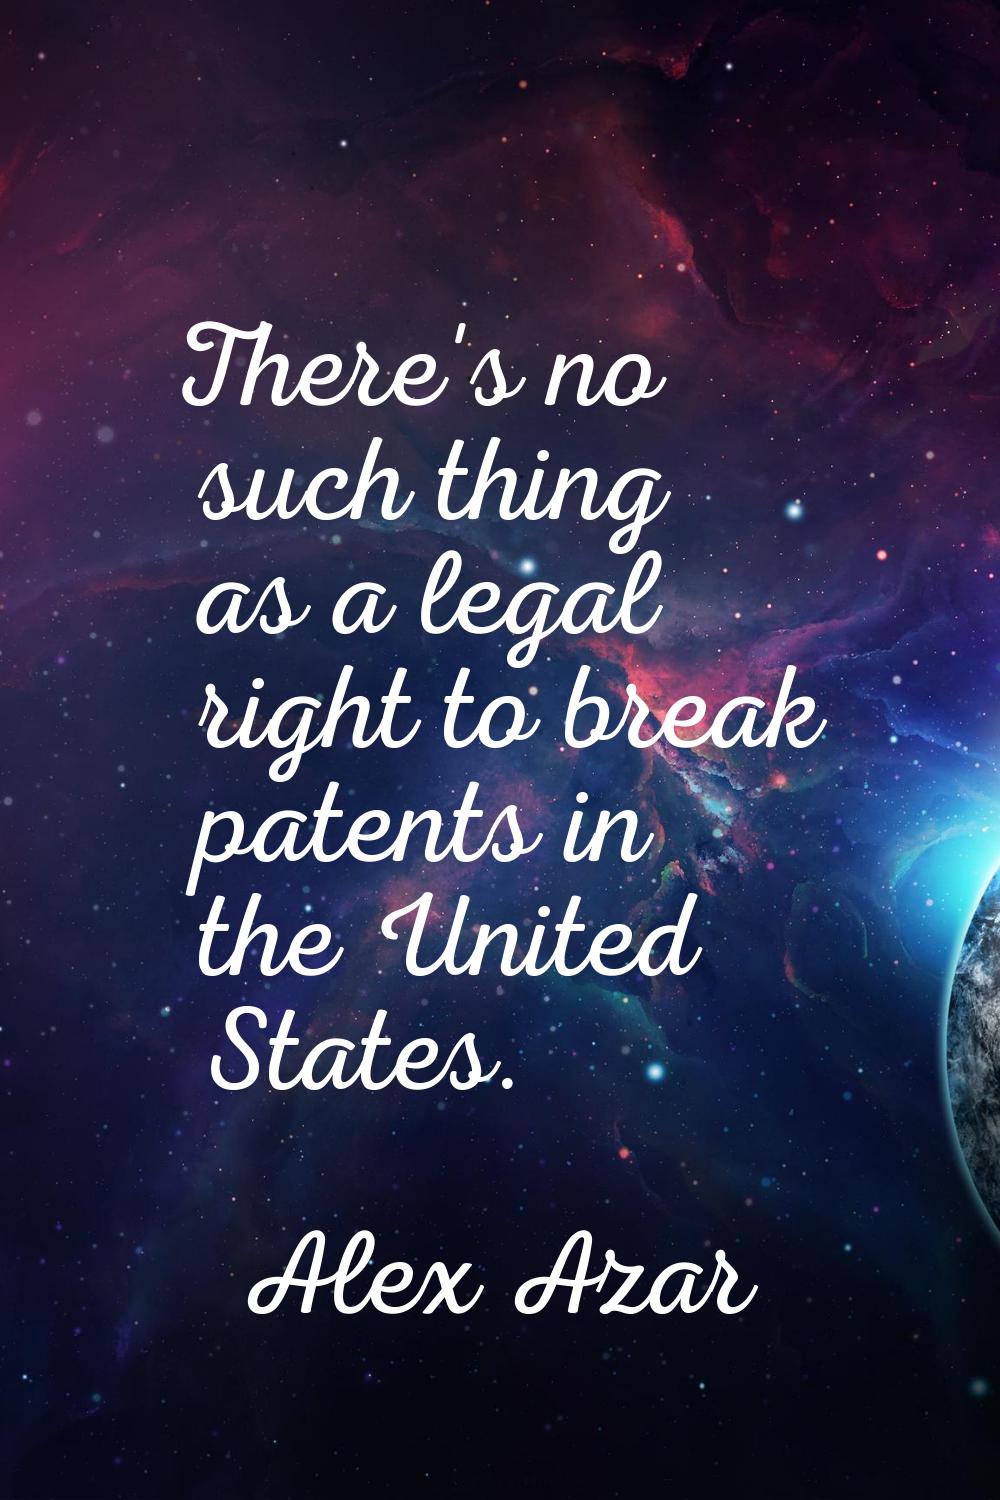 There's no such thing as a legal right to break patents in the United States.